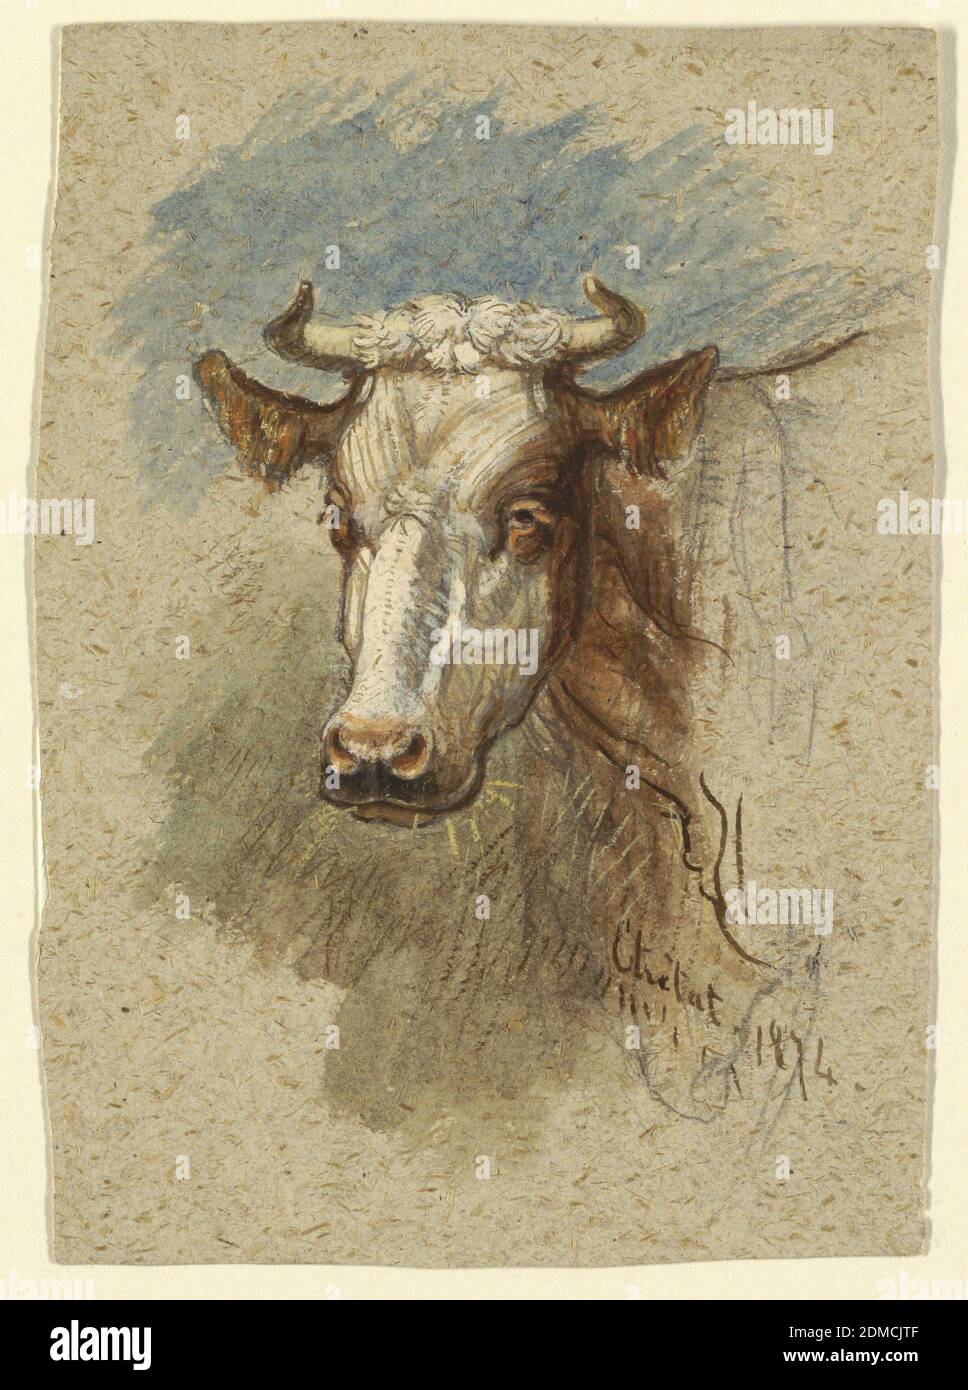 Head of a Cow, Étretat, Samuel Colman, American, 1832–1920, Brush and watercolor, gouache, graphite on rough brown-grey paper, Head and neck of a standing cow or ox. The head turned toward the viewer. Verso: Three details of a head of a cow, in graphite., Étretat, Normandy, France, 1874, animals, Drawing Stock Photo